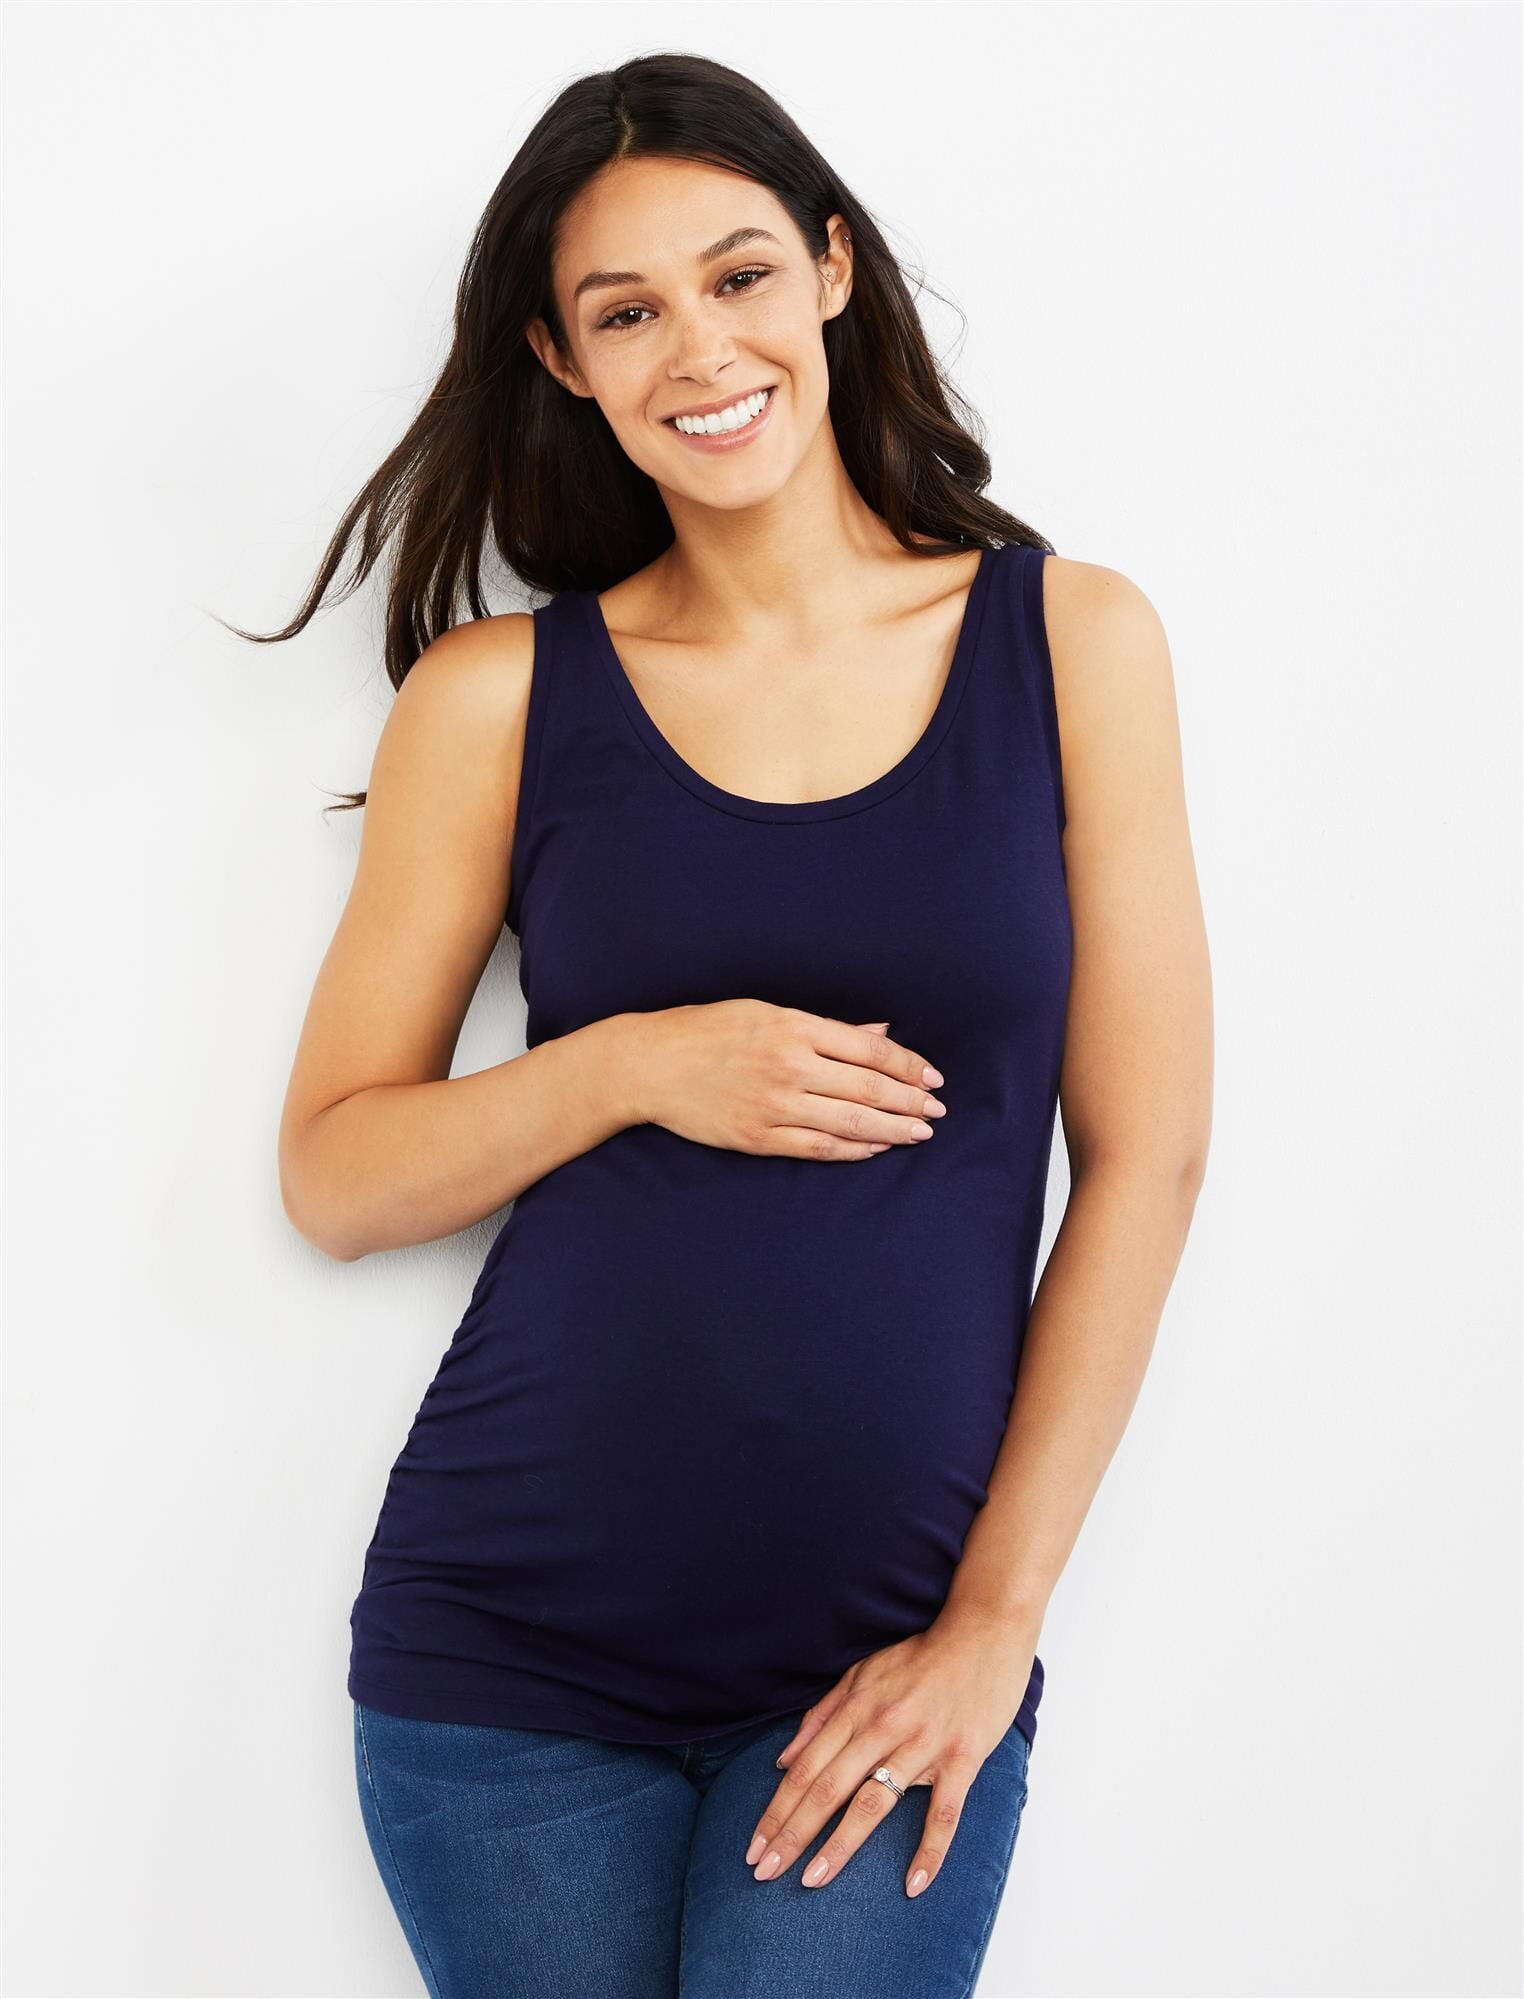 FABRACK Women/'s Maternity Tank Tops Must-Have Summer Sleeveless Side Ruched Basic Pregnancy Shirt